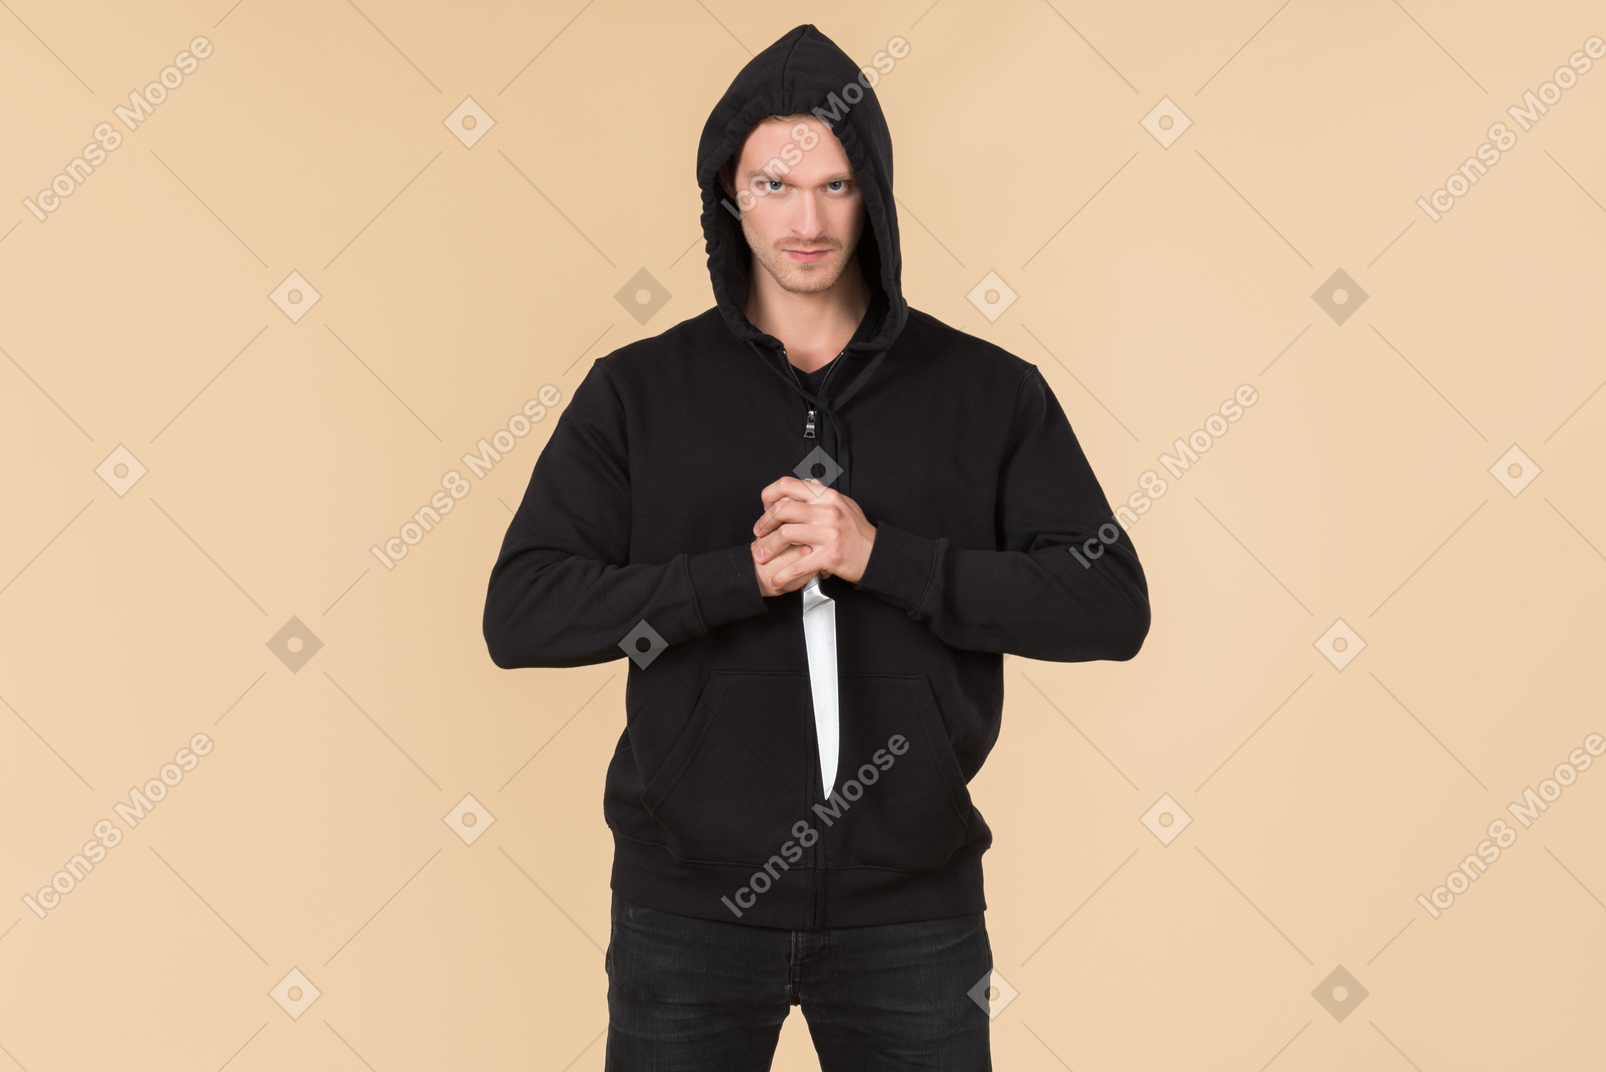 Criminal with hood on holding a knife